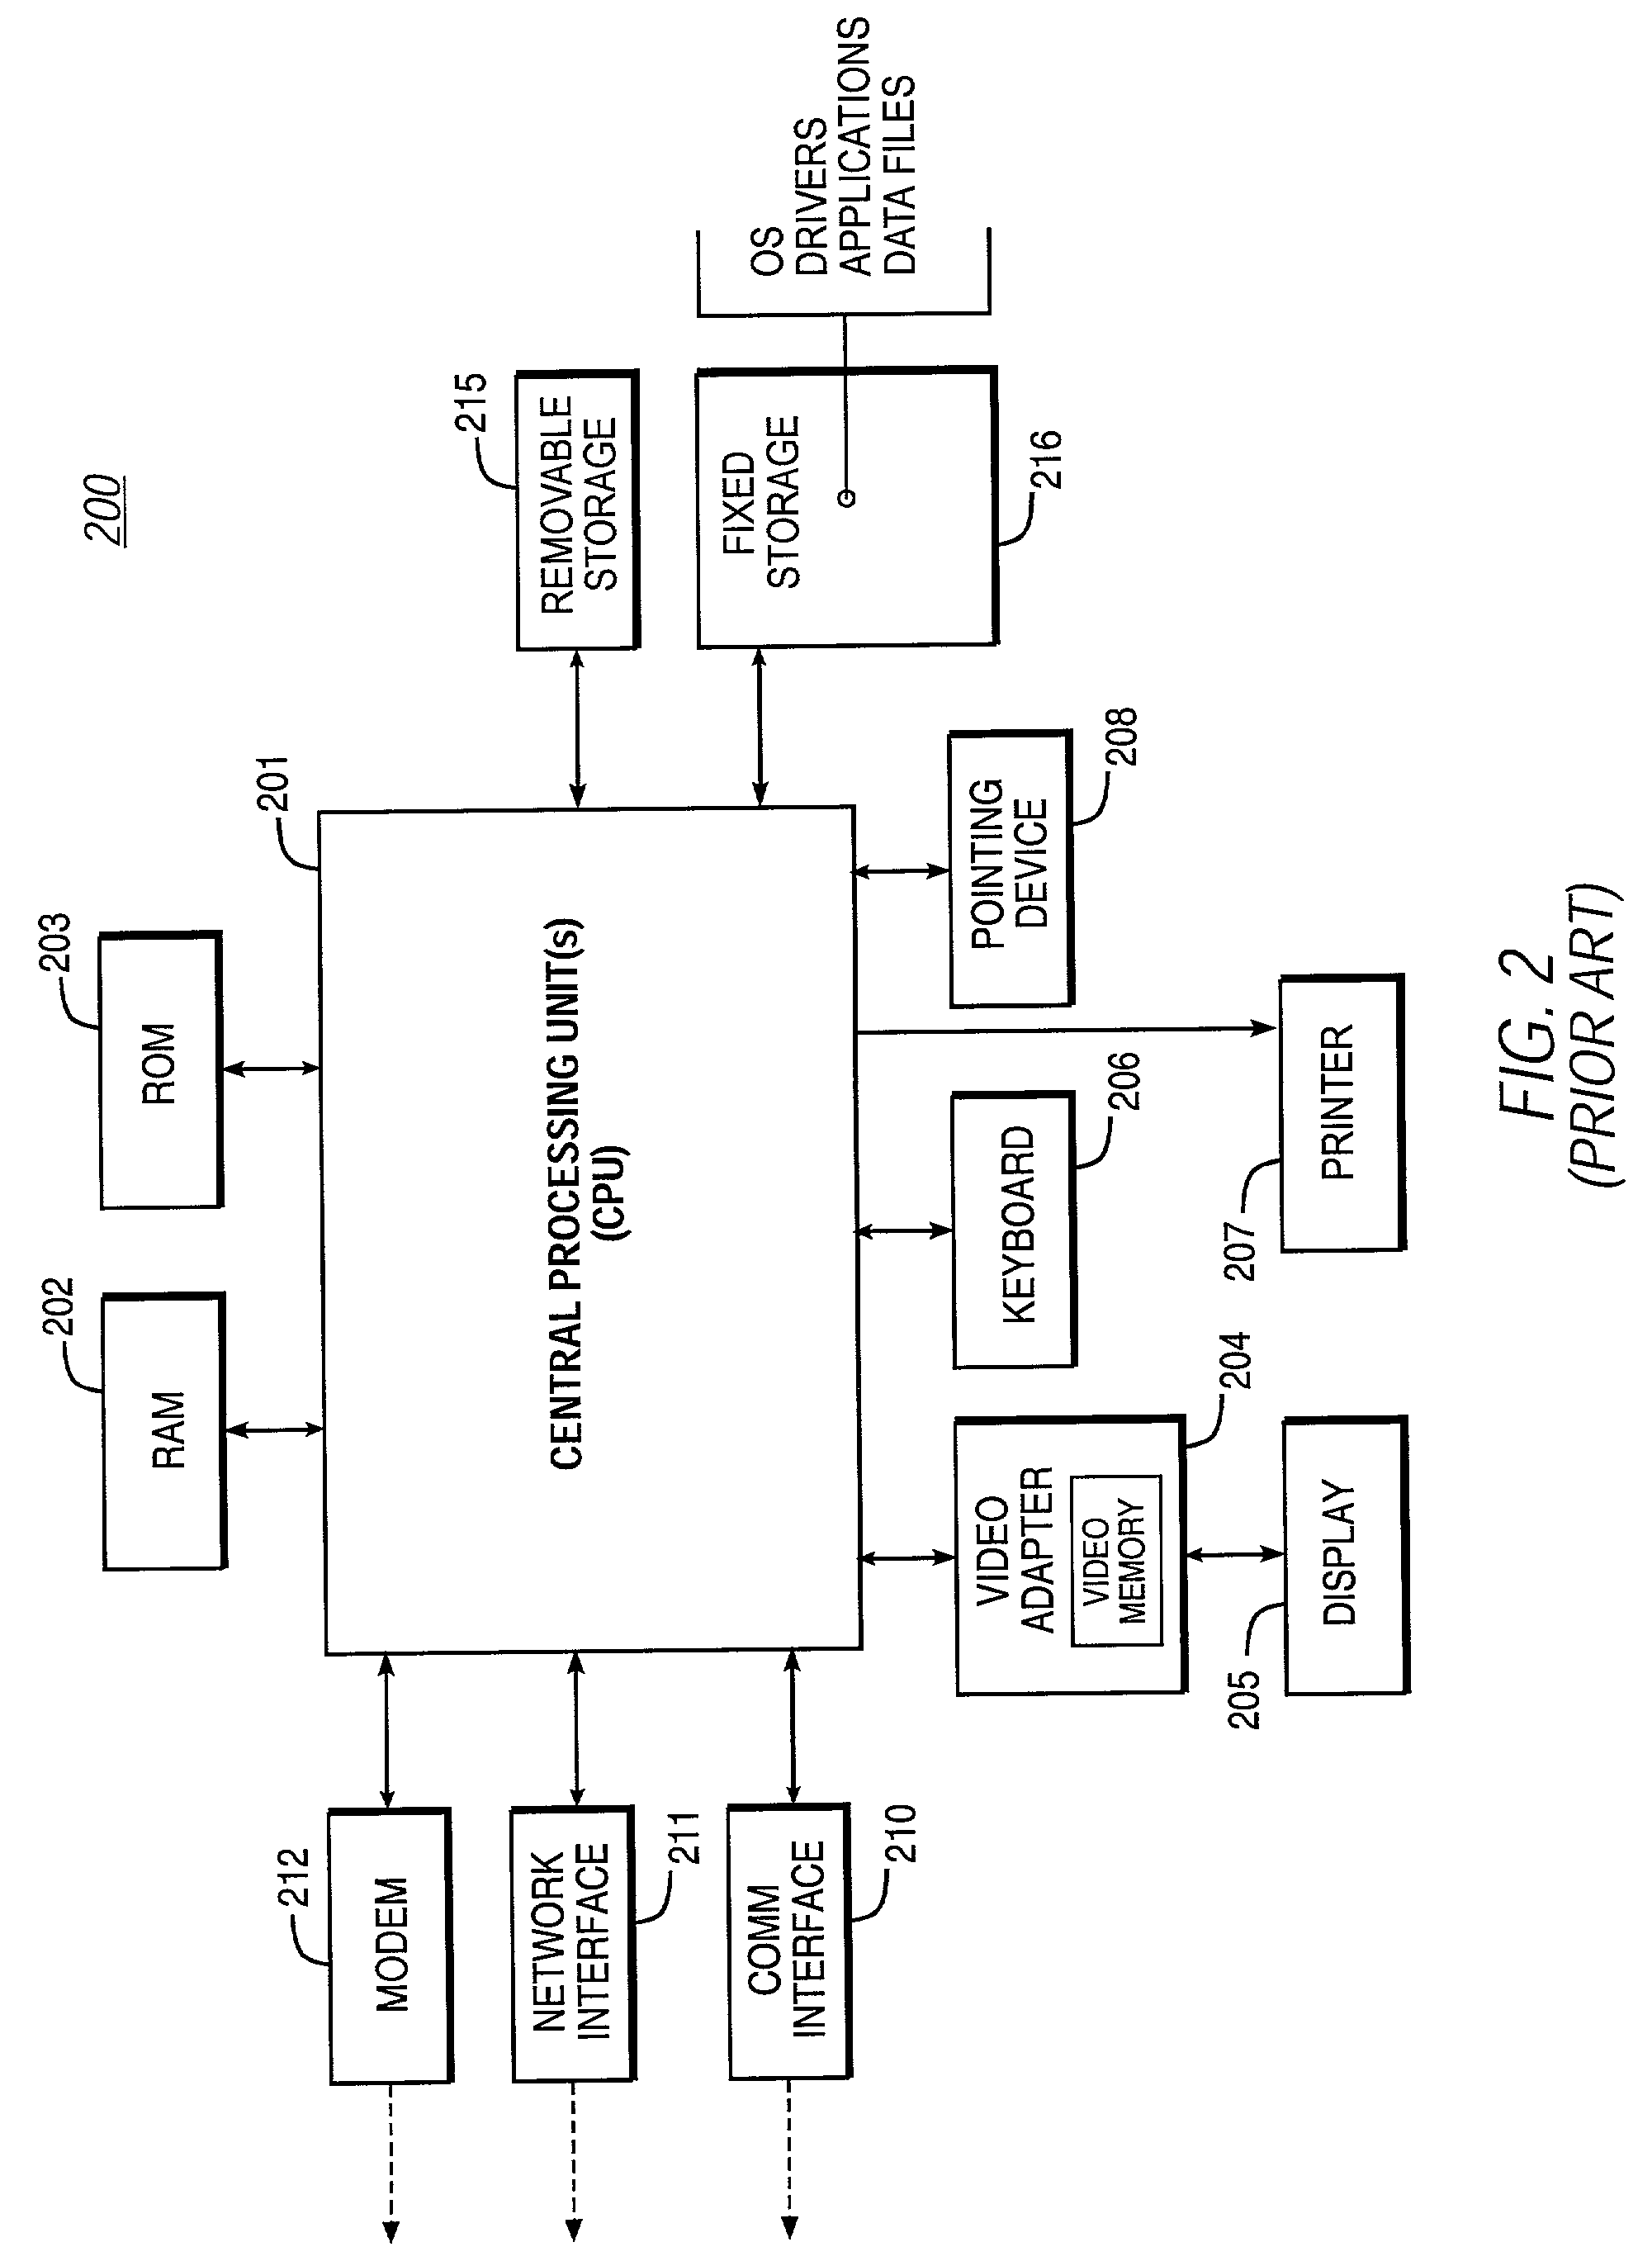 E-mail system with methodology for accelerating mass mailings